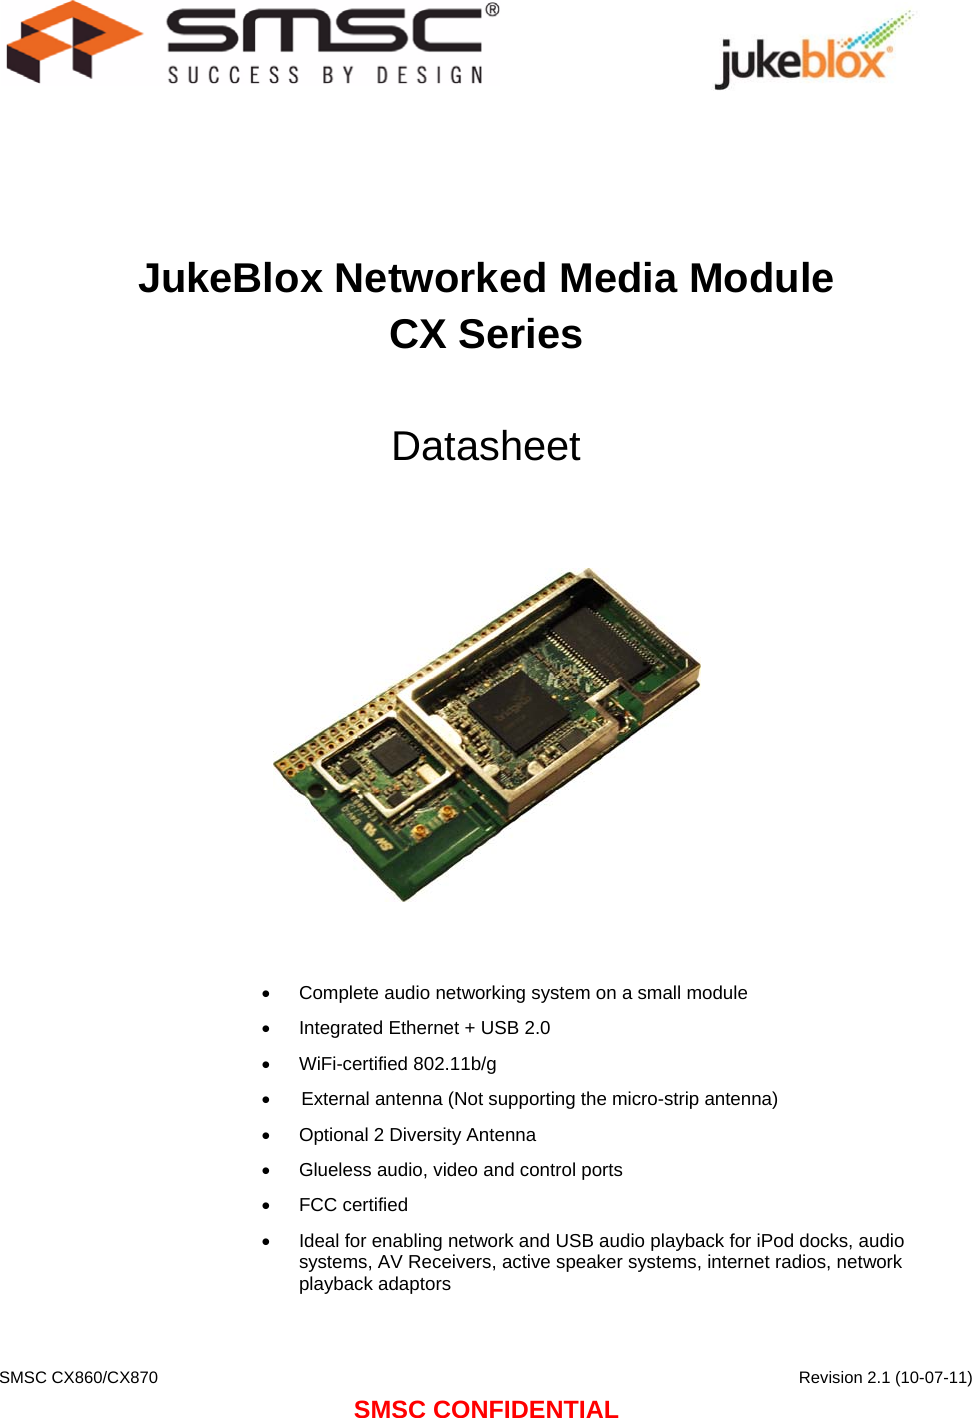    SMSC CX860/CX870      Revision 2.1 (10-07-11) SMSC CONFIDENTIAL                                  JukeBlox Networked Media Module CX Series  Datasheet        Complete audio networking system on a small module   Integrated Ethernet + USB 2.0  WiFi-certified 802.11b/g  ([WHUQDOantenna 1RWVXSSRUWLQJWKHPLFURVWULSDQWHQQD  Optional  Diversity Antenna   Glueless audio, video and control ports  FCC certified   Ideal for enabling network and USB audio playback for iPod docks, audio systems, AV Receivers, active speaker systems, internet radios, network playback adaptors  